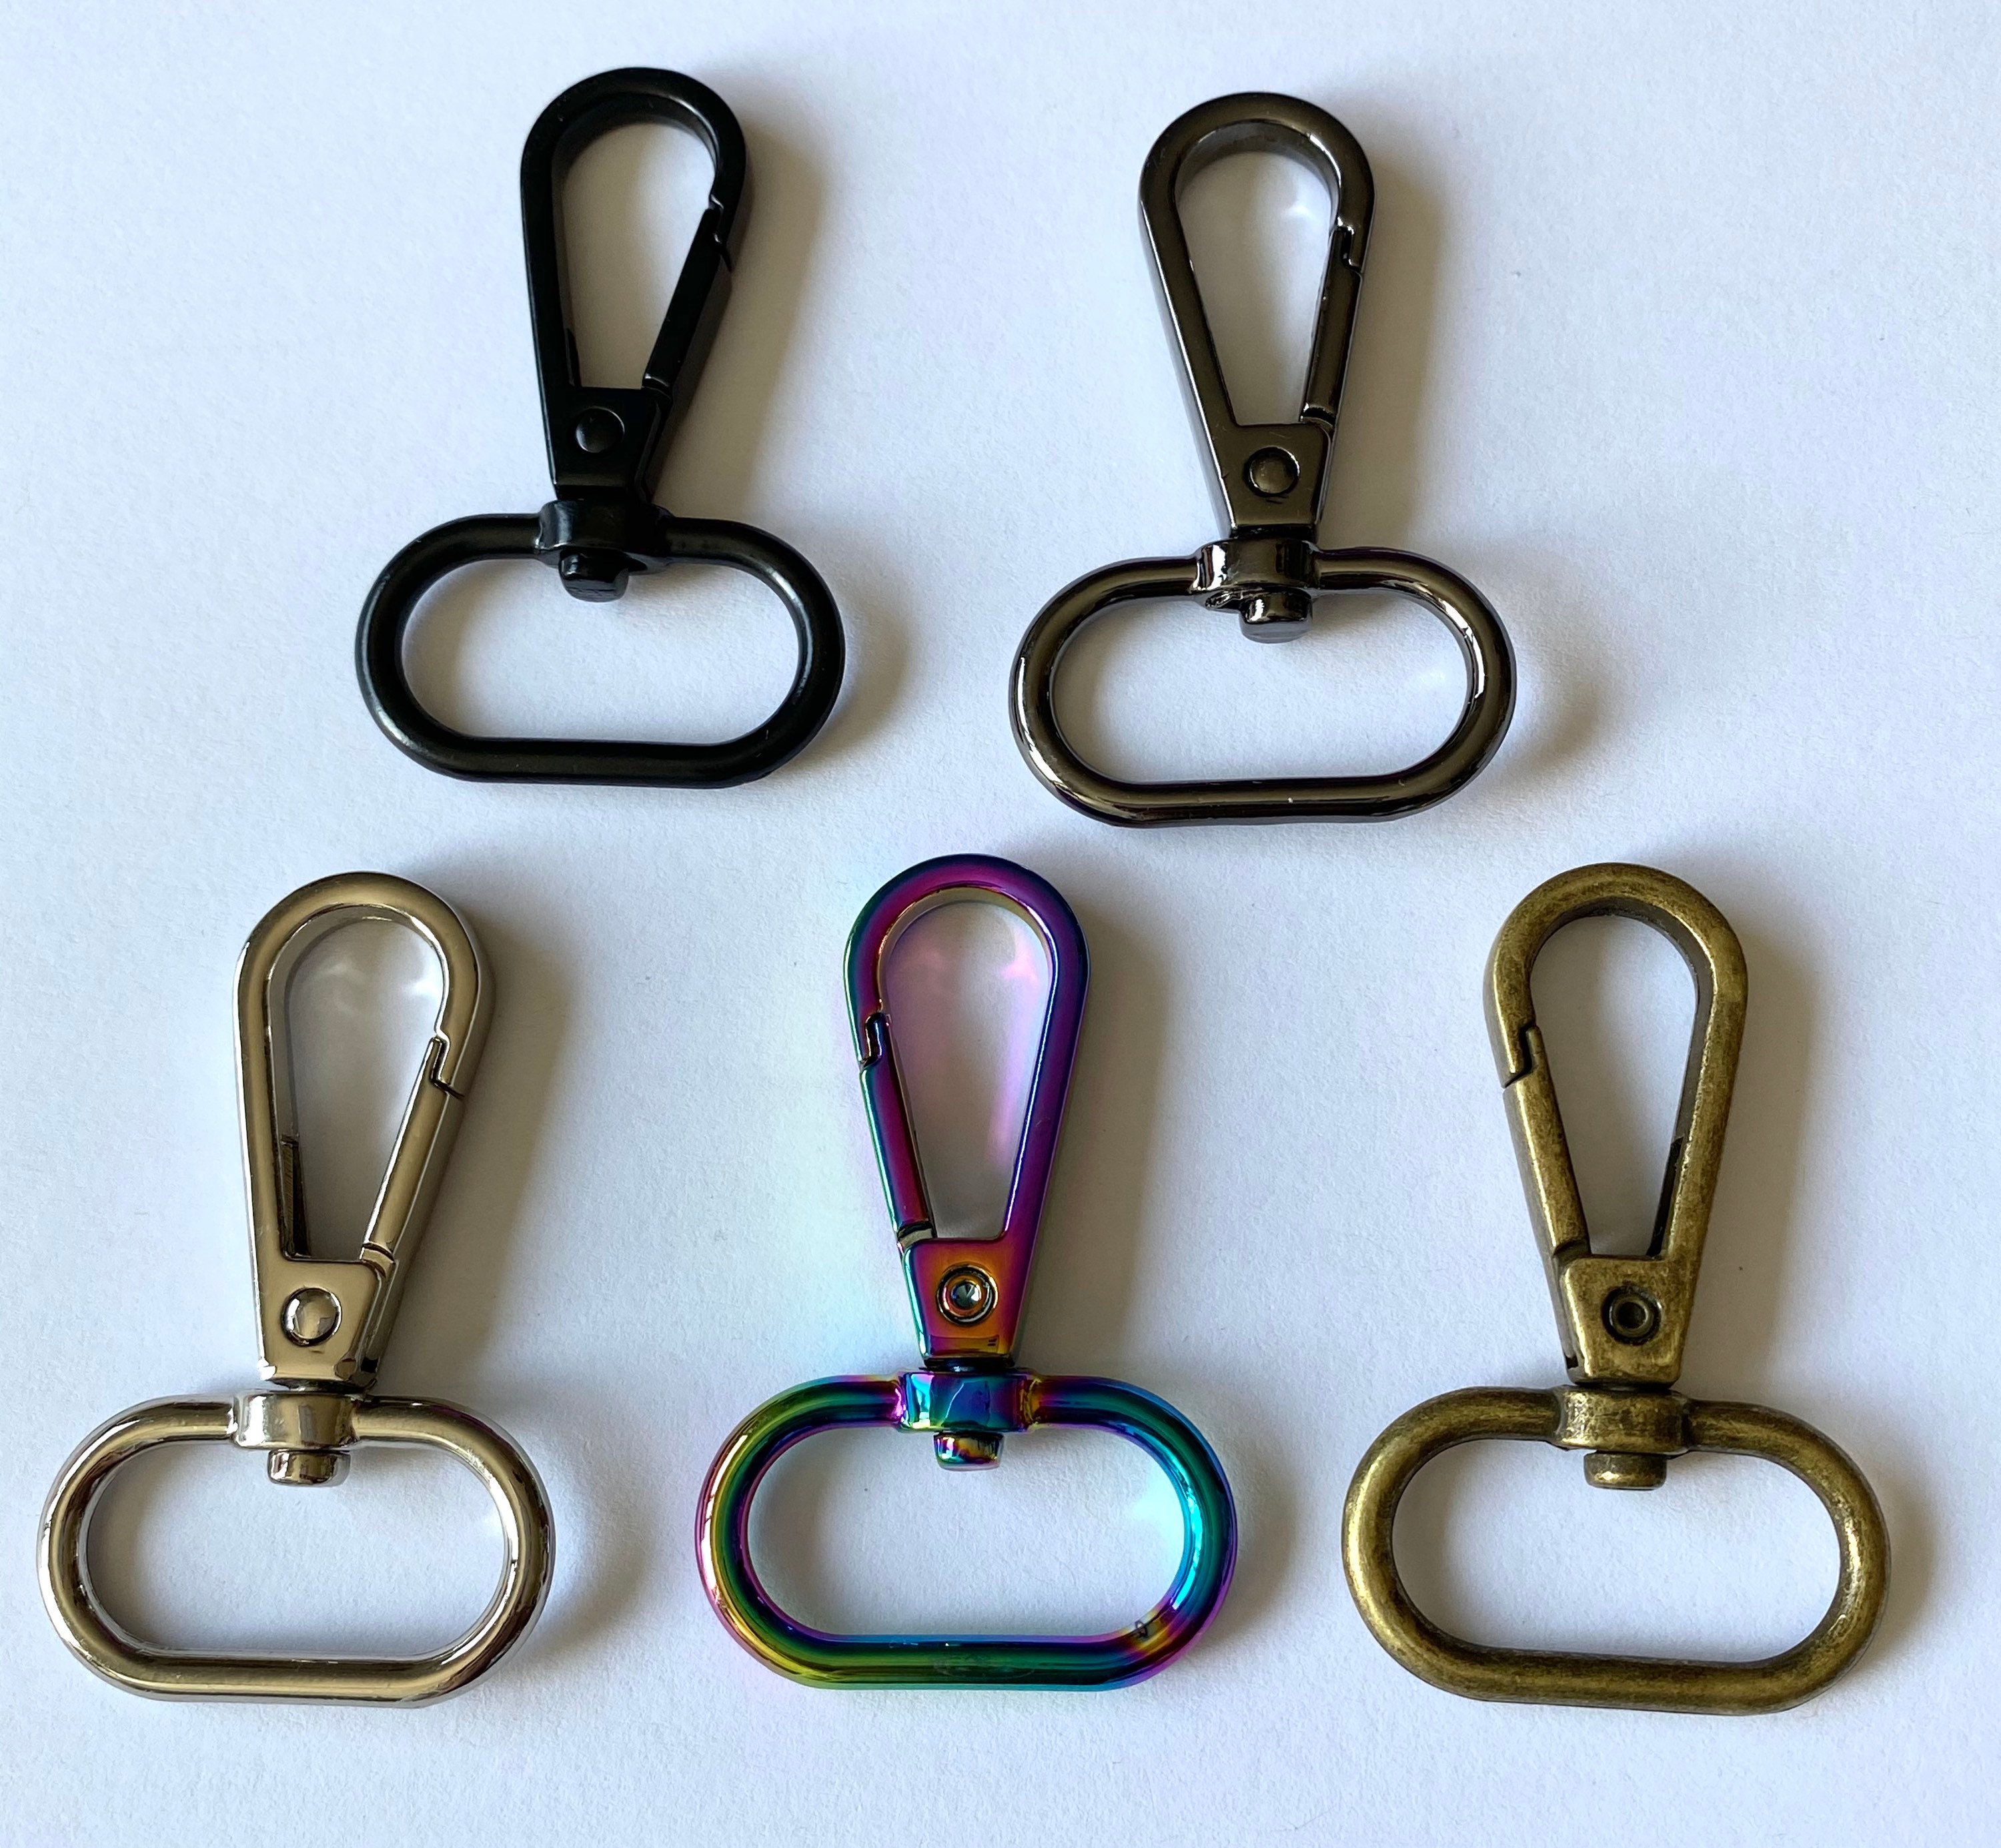 10pc Keychains With Clips, Bulk Key Rings With Clips, Key Ring With Swivel  Clasp, Custom Keyrings, Custom Key Rings, Bulk Wholesale Keyrings 